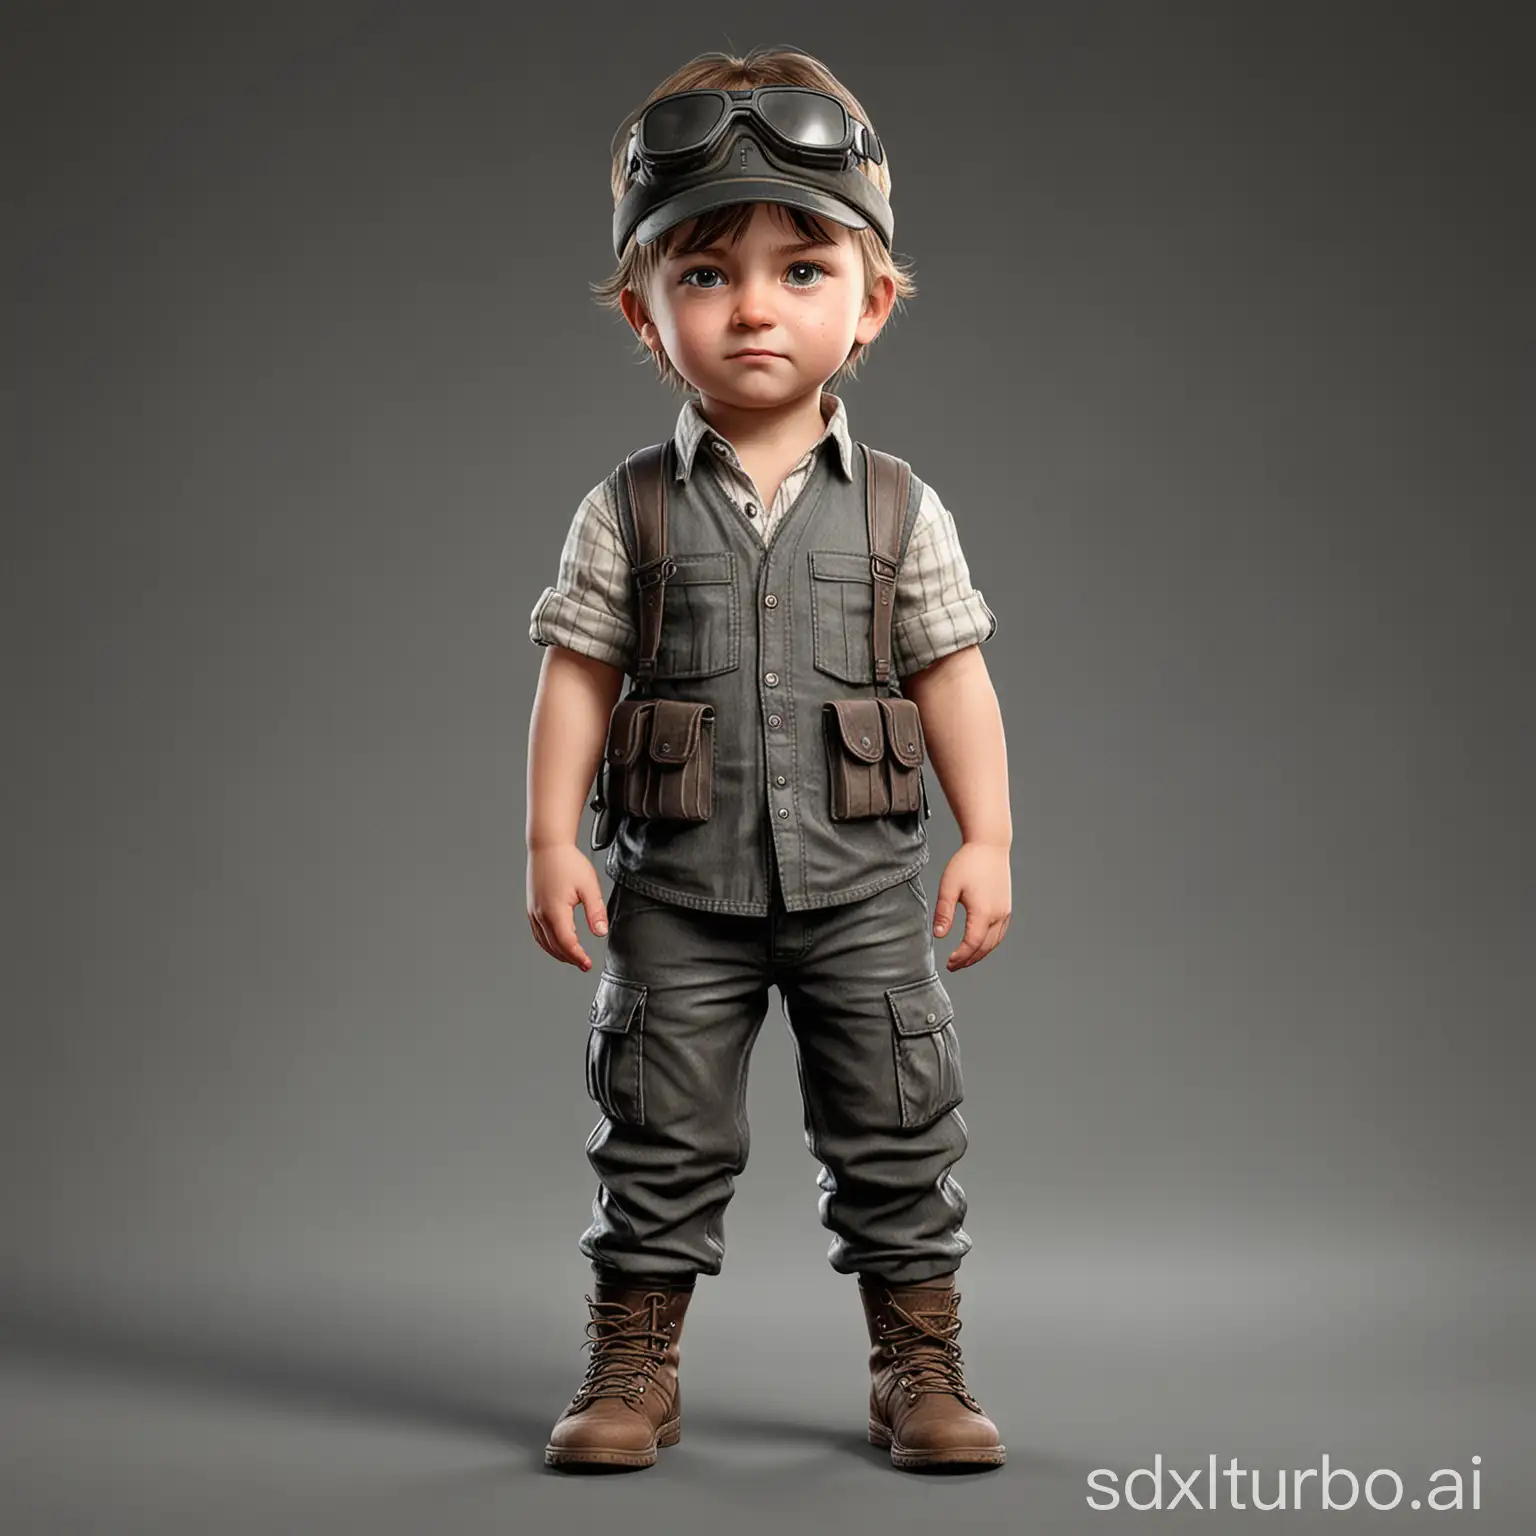 Young-Child-with-Masculine-Face-in-PUBG-Game-Character-Pose